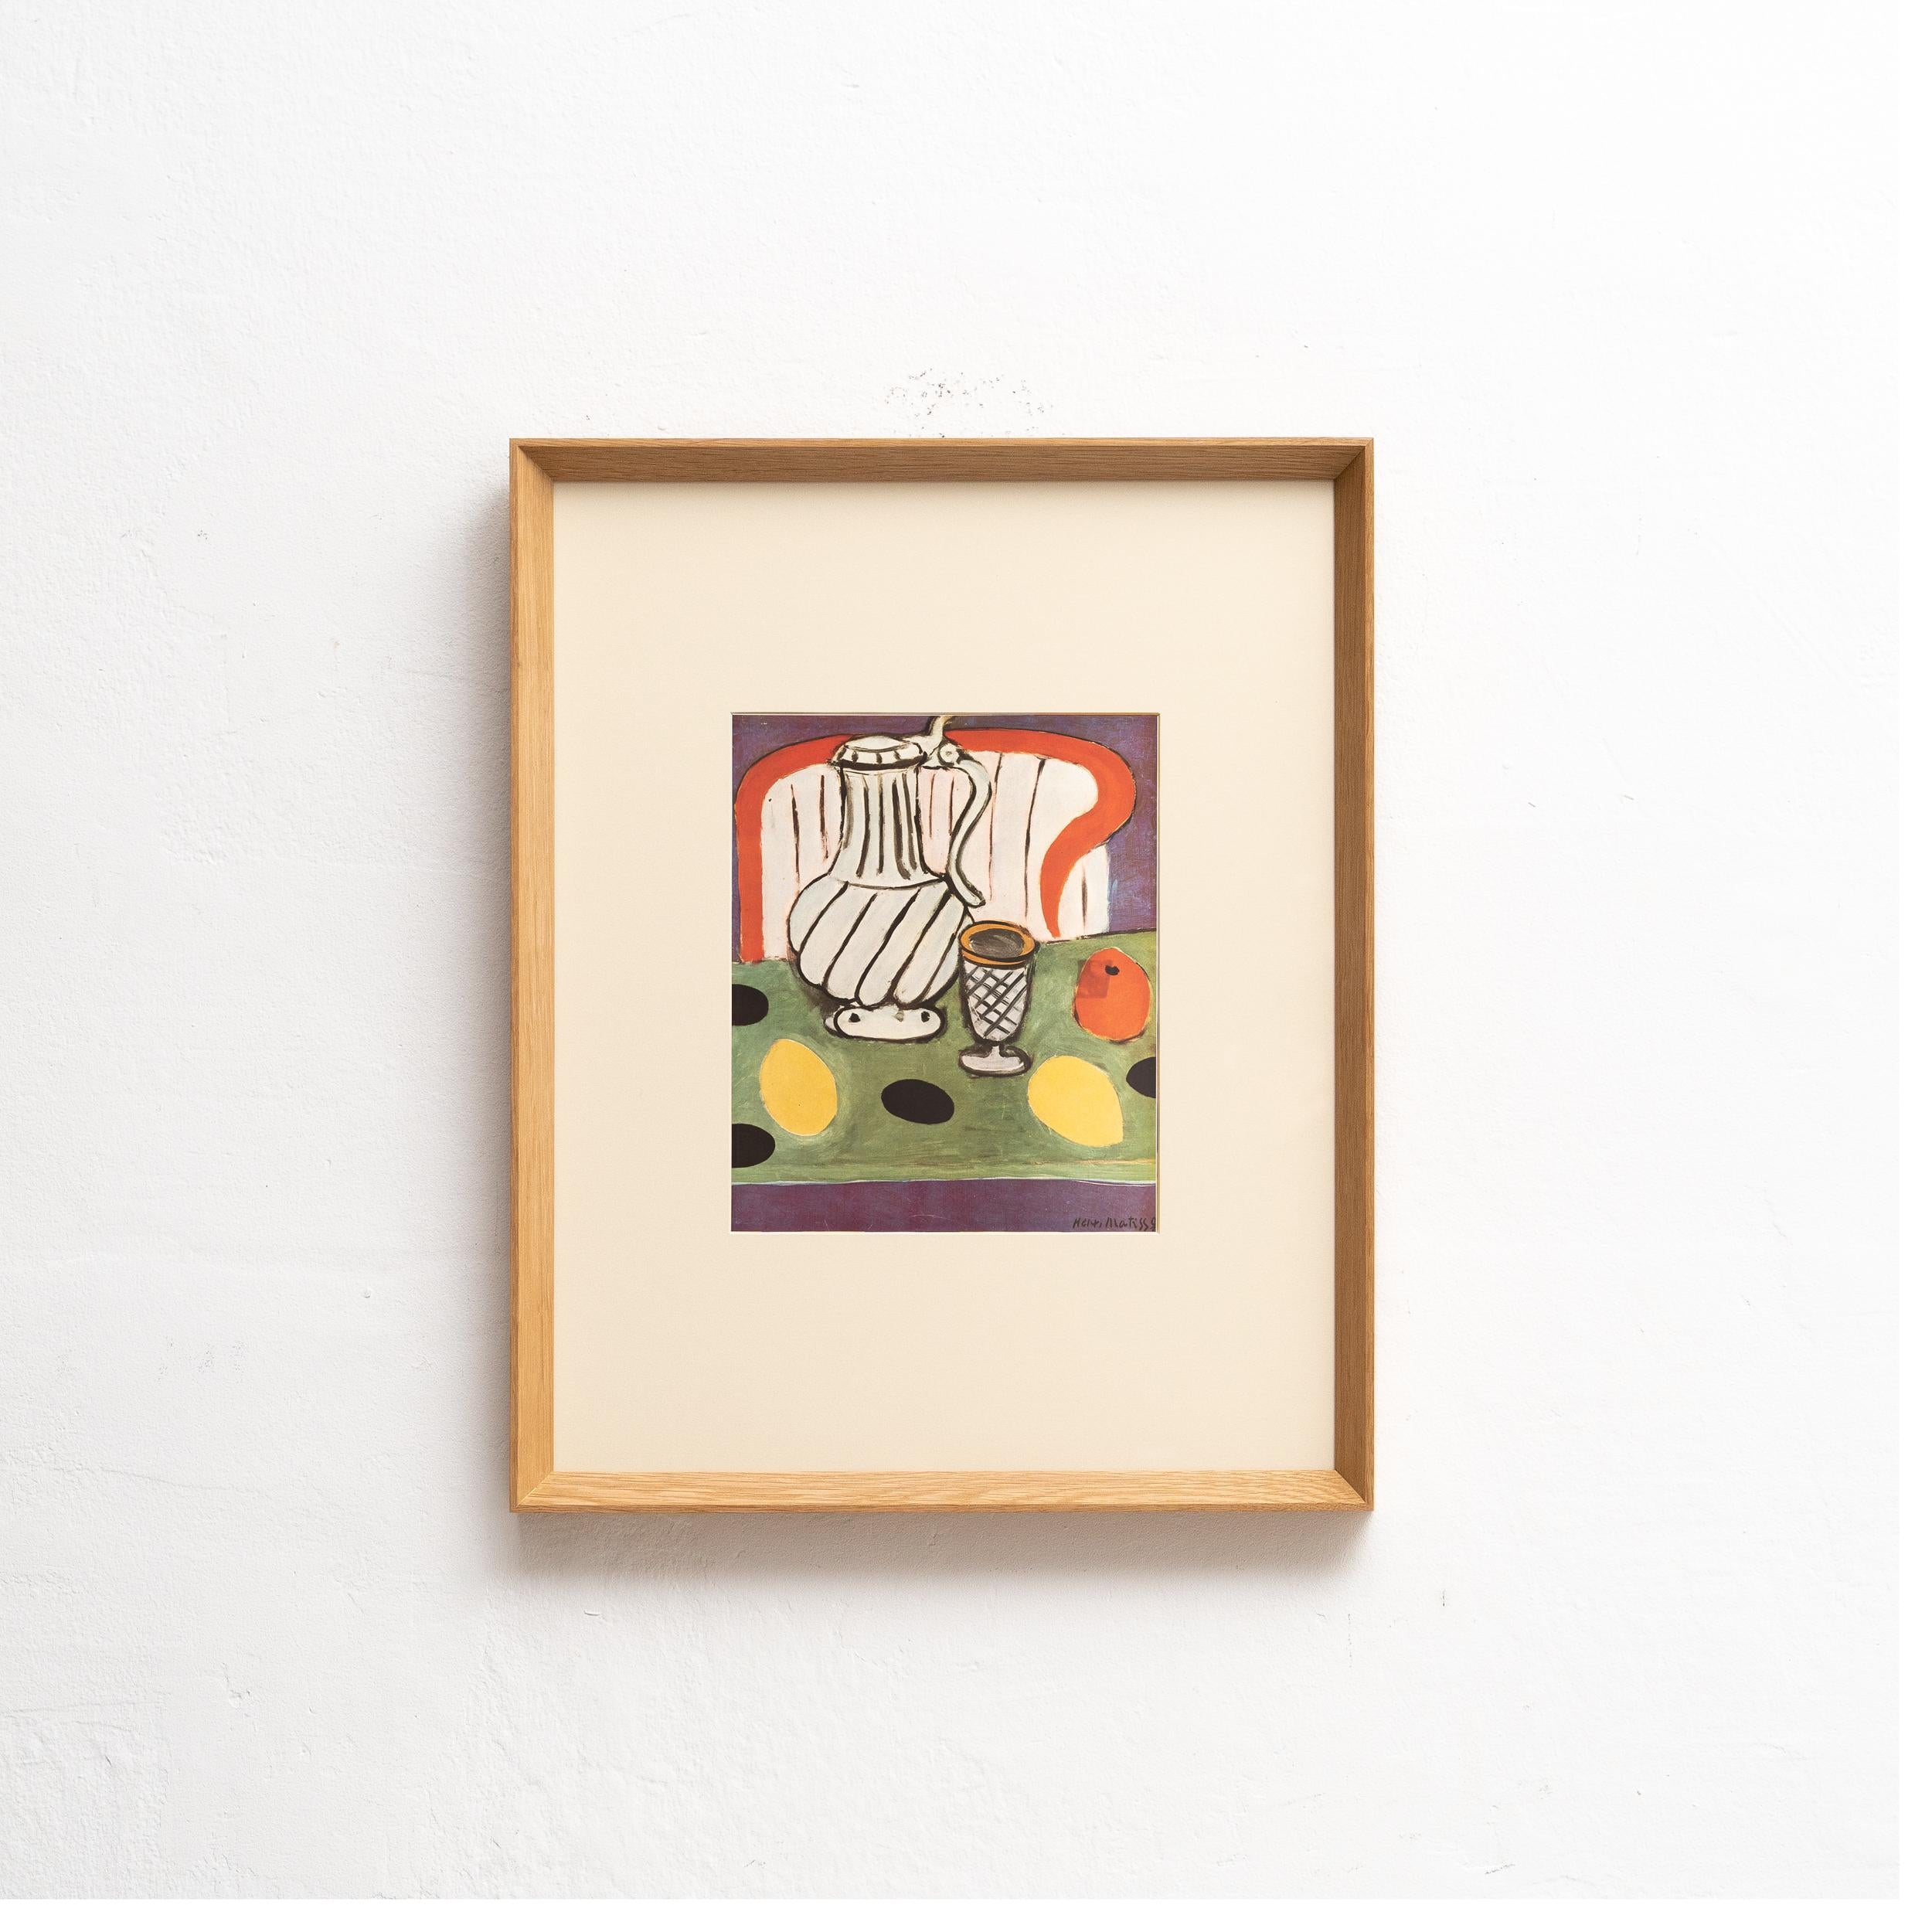 Immerse yourself in the timeless brilliance of Henri Matisse with this extraordinary color lithograph, expertly edited by Editions du Chene in Paris, France, in 1943. Adorned by a stunning solid wood frame, measuring 51cm in height and 40.5cm in